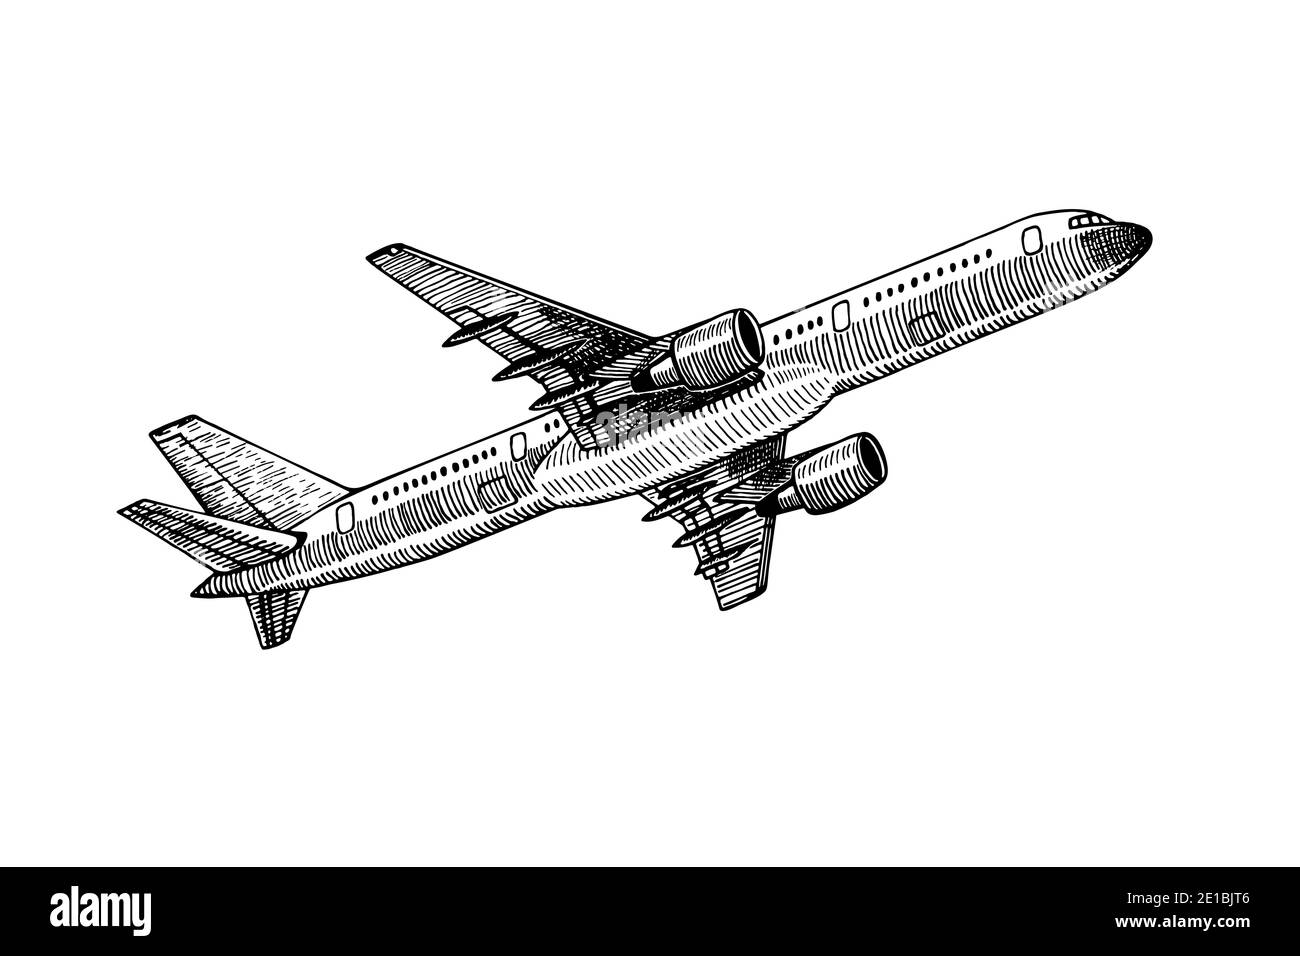 Plane Flies In Sky Vector Sketch Illustration Air Travel Tourism Flight  Hand Drawn Isolated Design Elements Stock Illustration  Download Image Now   iStock